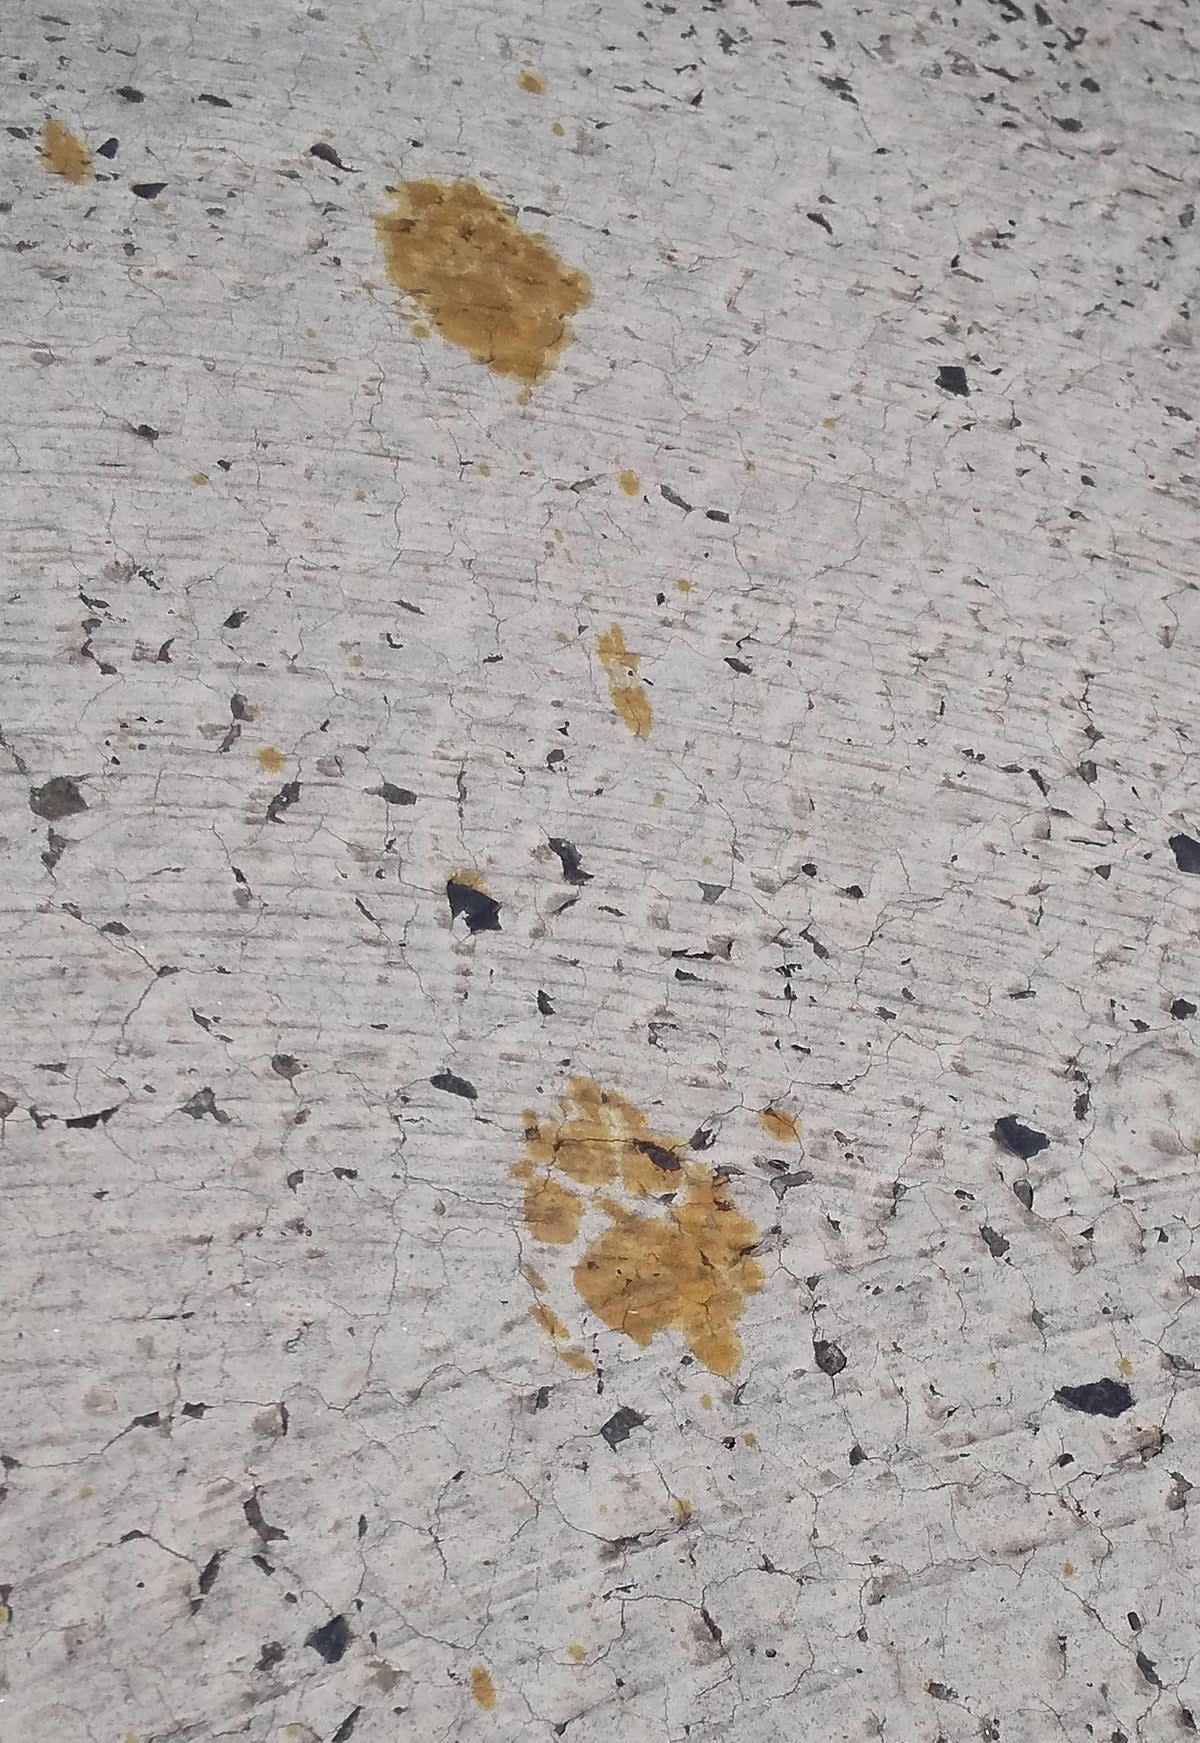 Yellow paw prints seen by workers (Nomura Plating/AFP via Getty Images)